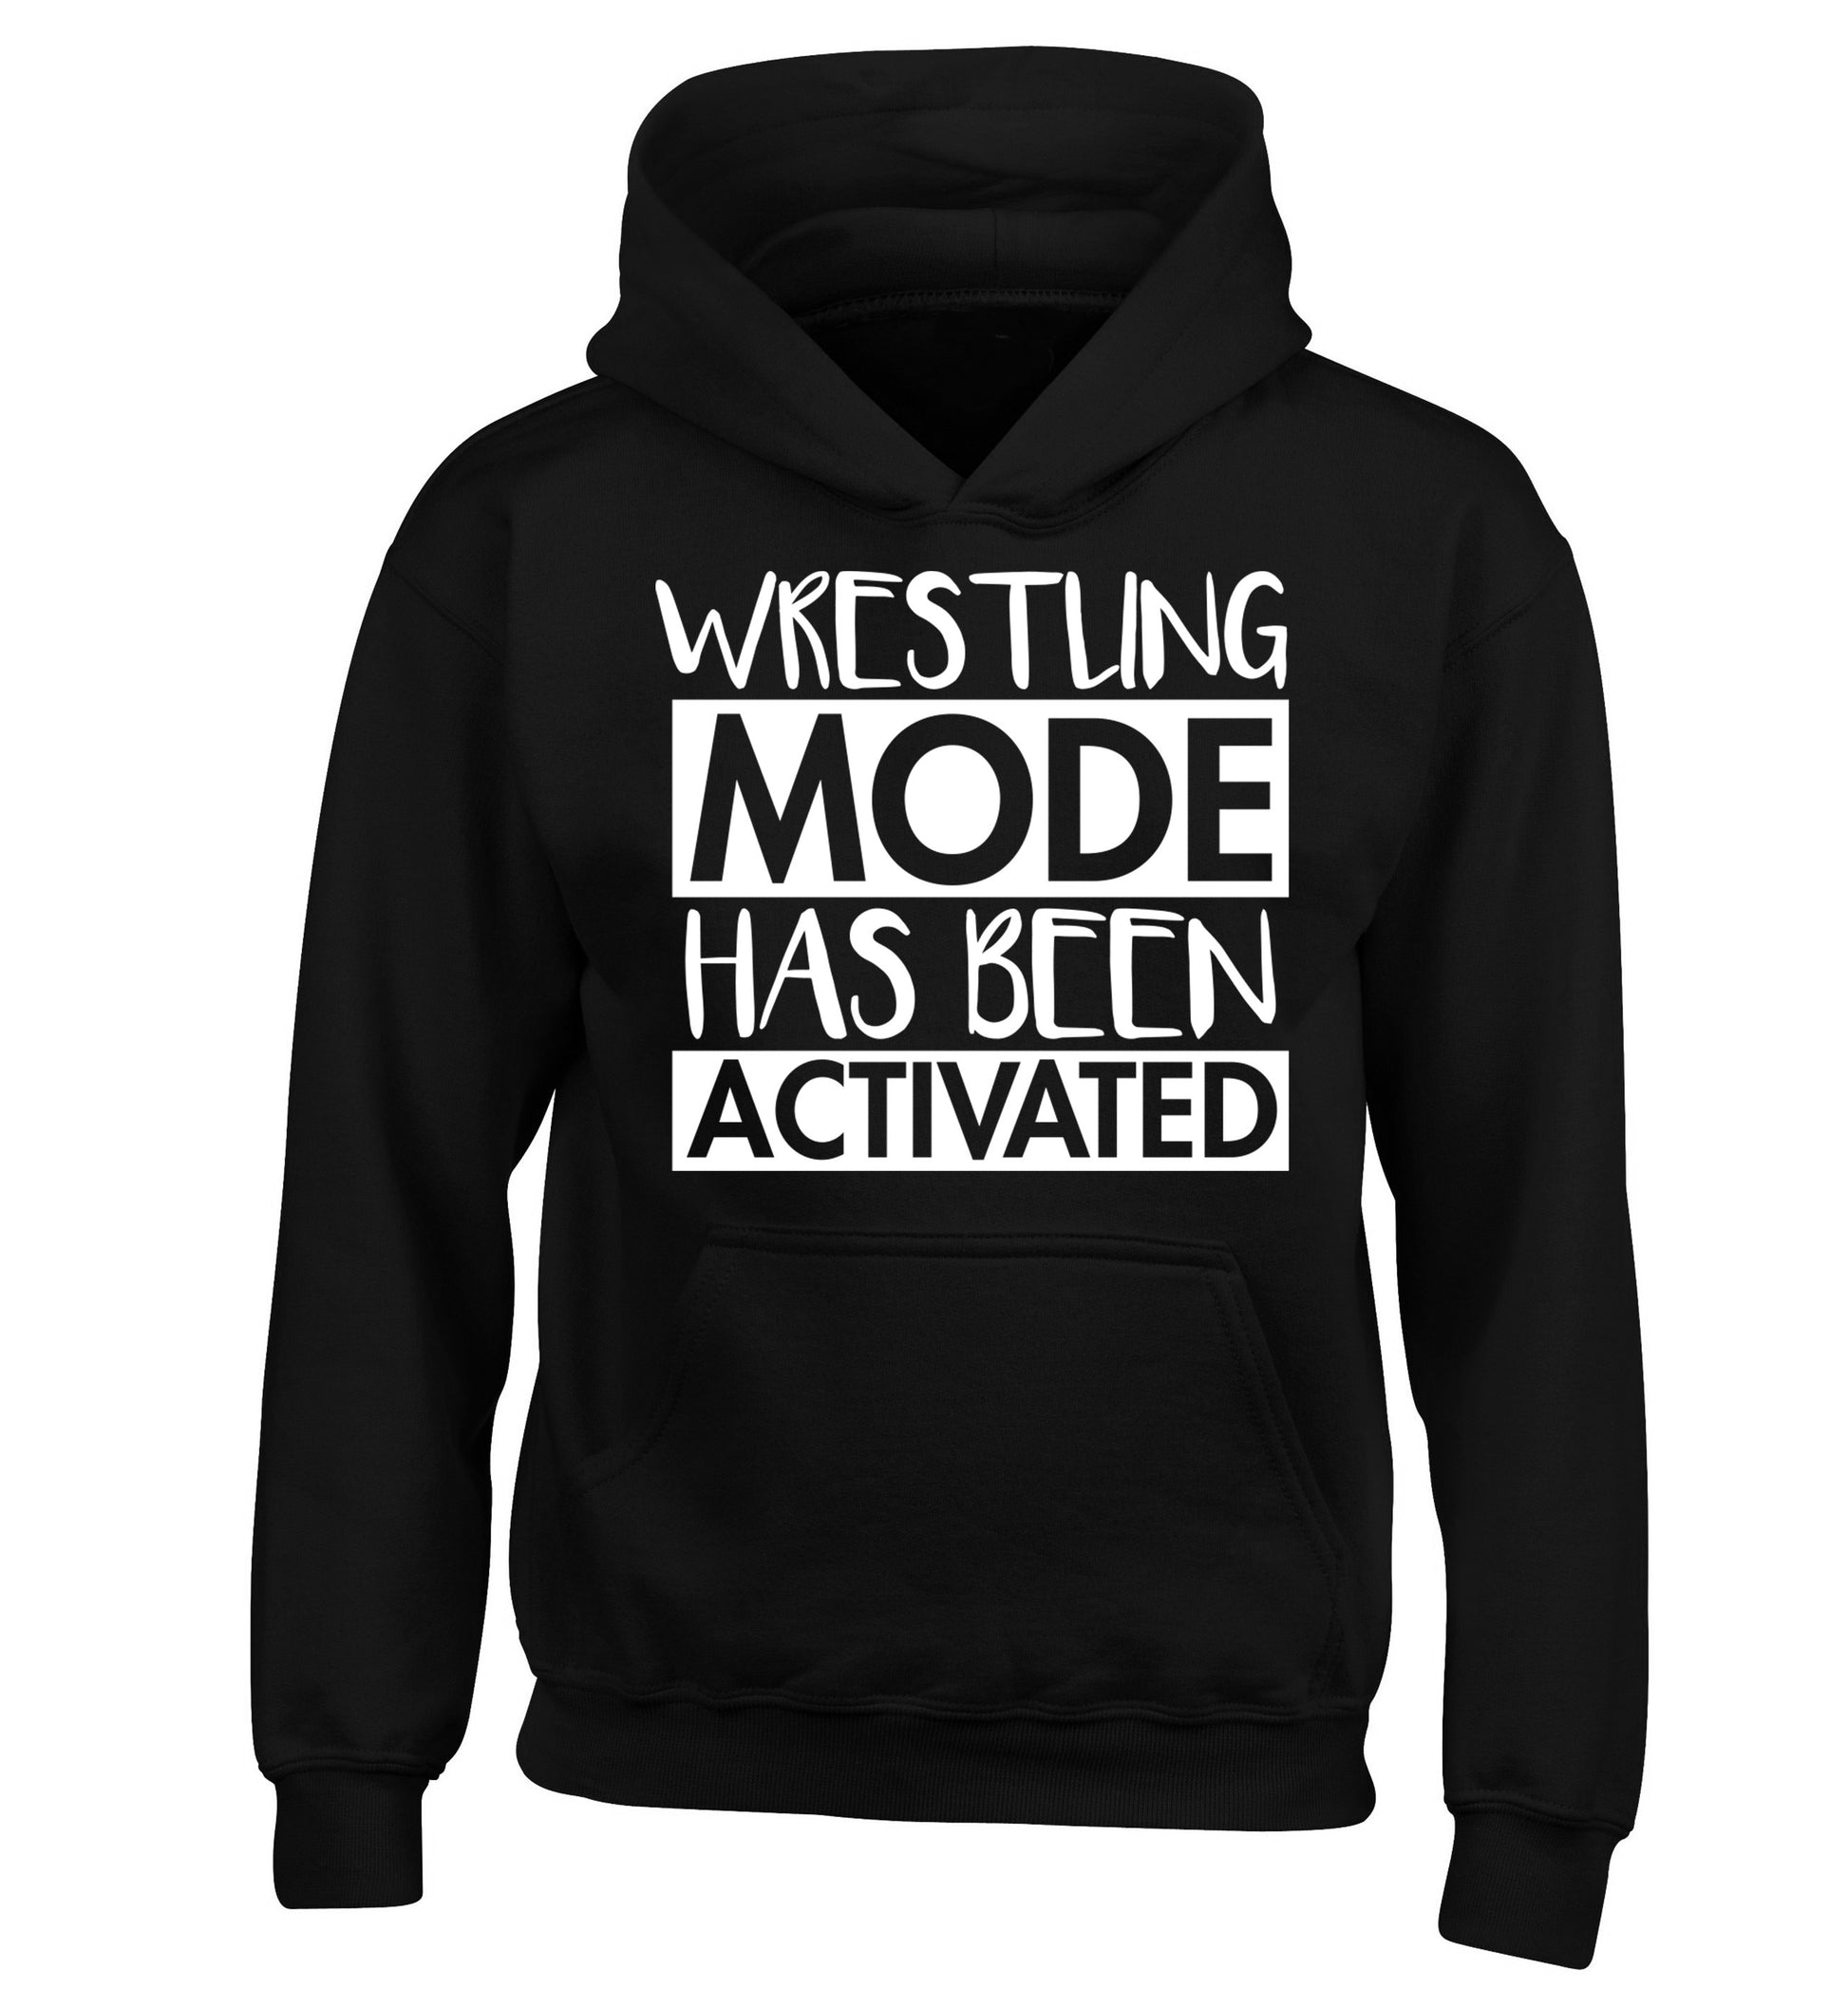 Wresting mode activated children's black hoodie 12-14 Years